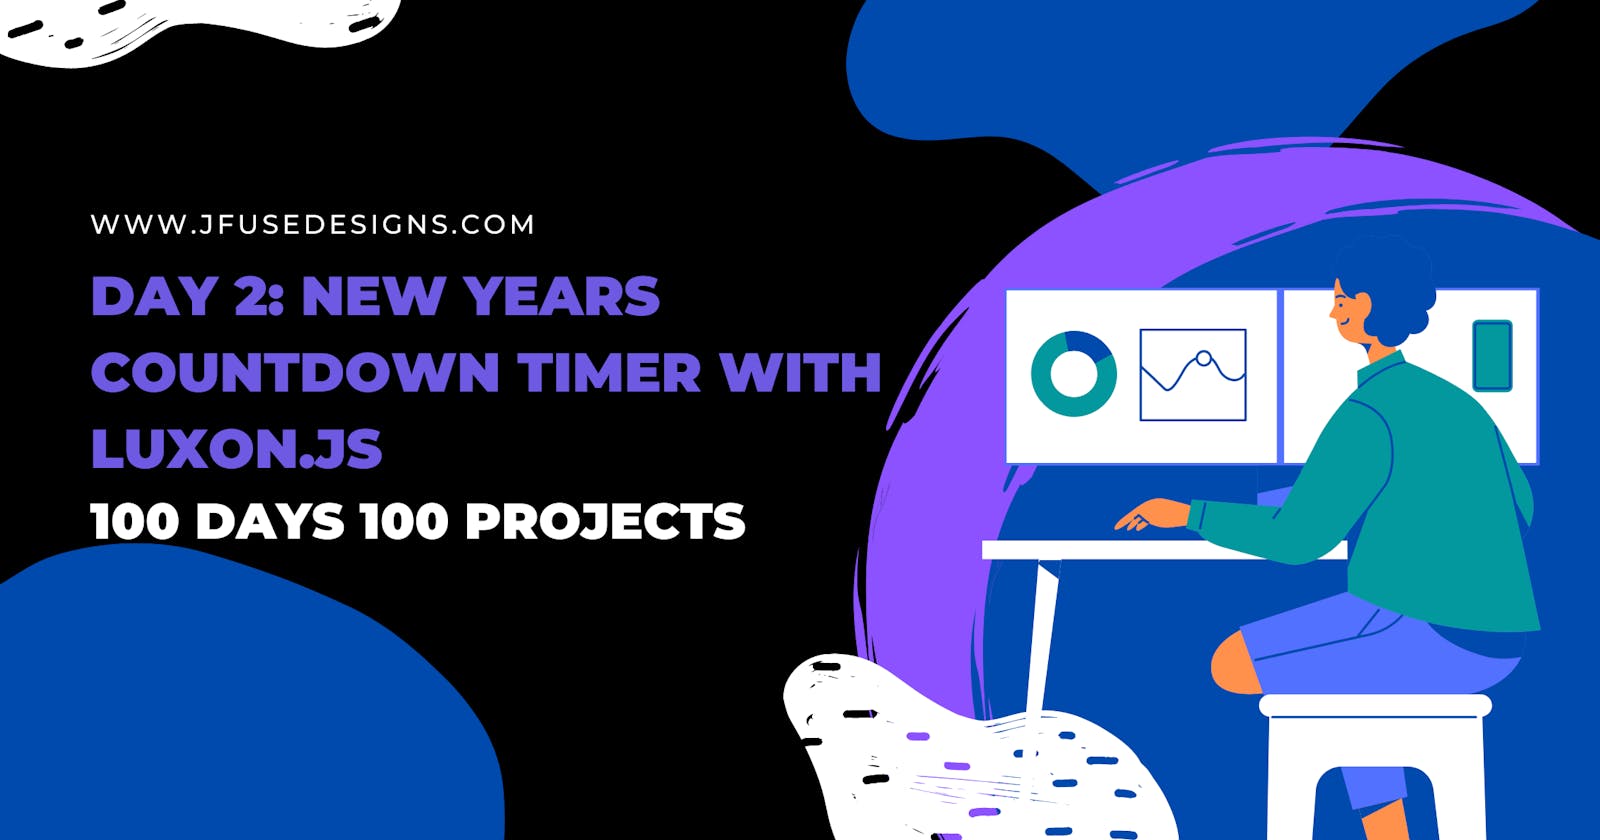 Create a New Years Countdown Timer with Luxon.js